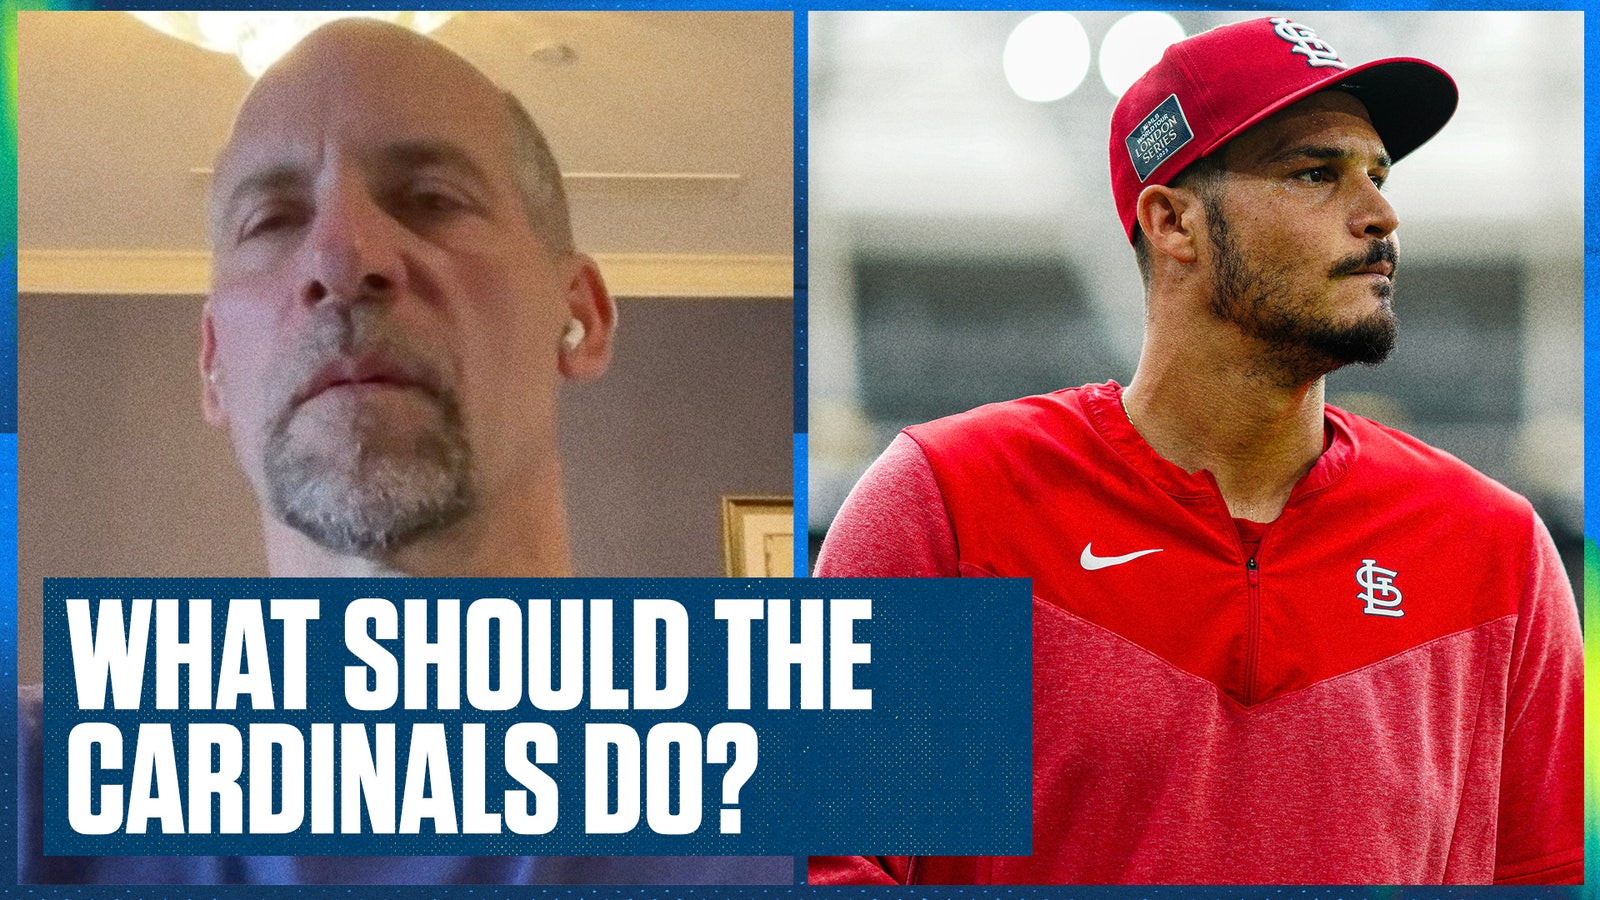 John Smoltz on what the Cardinals should do at the trade deadline